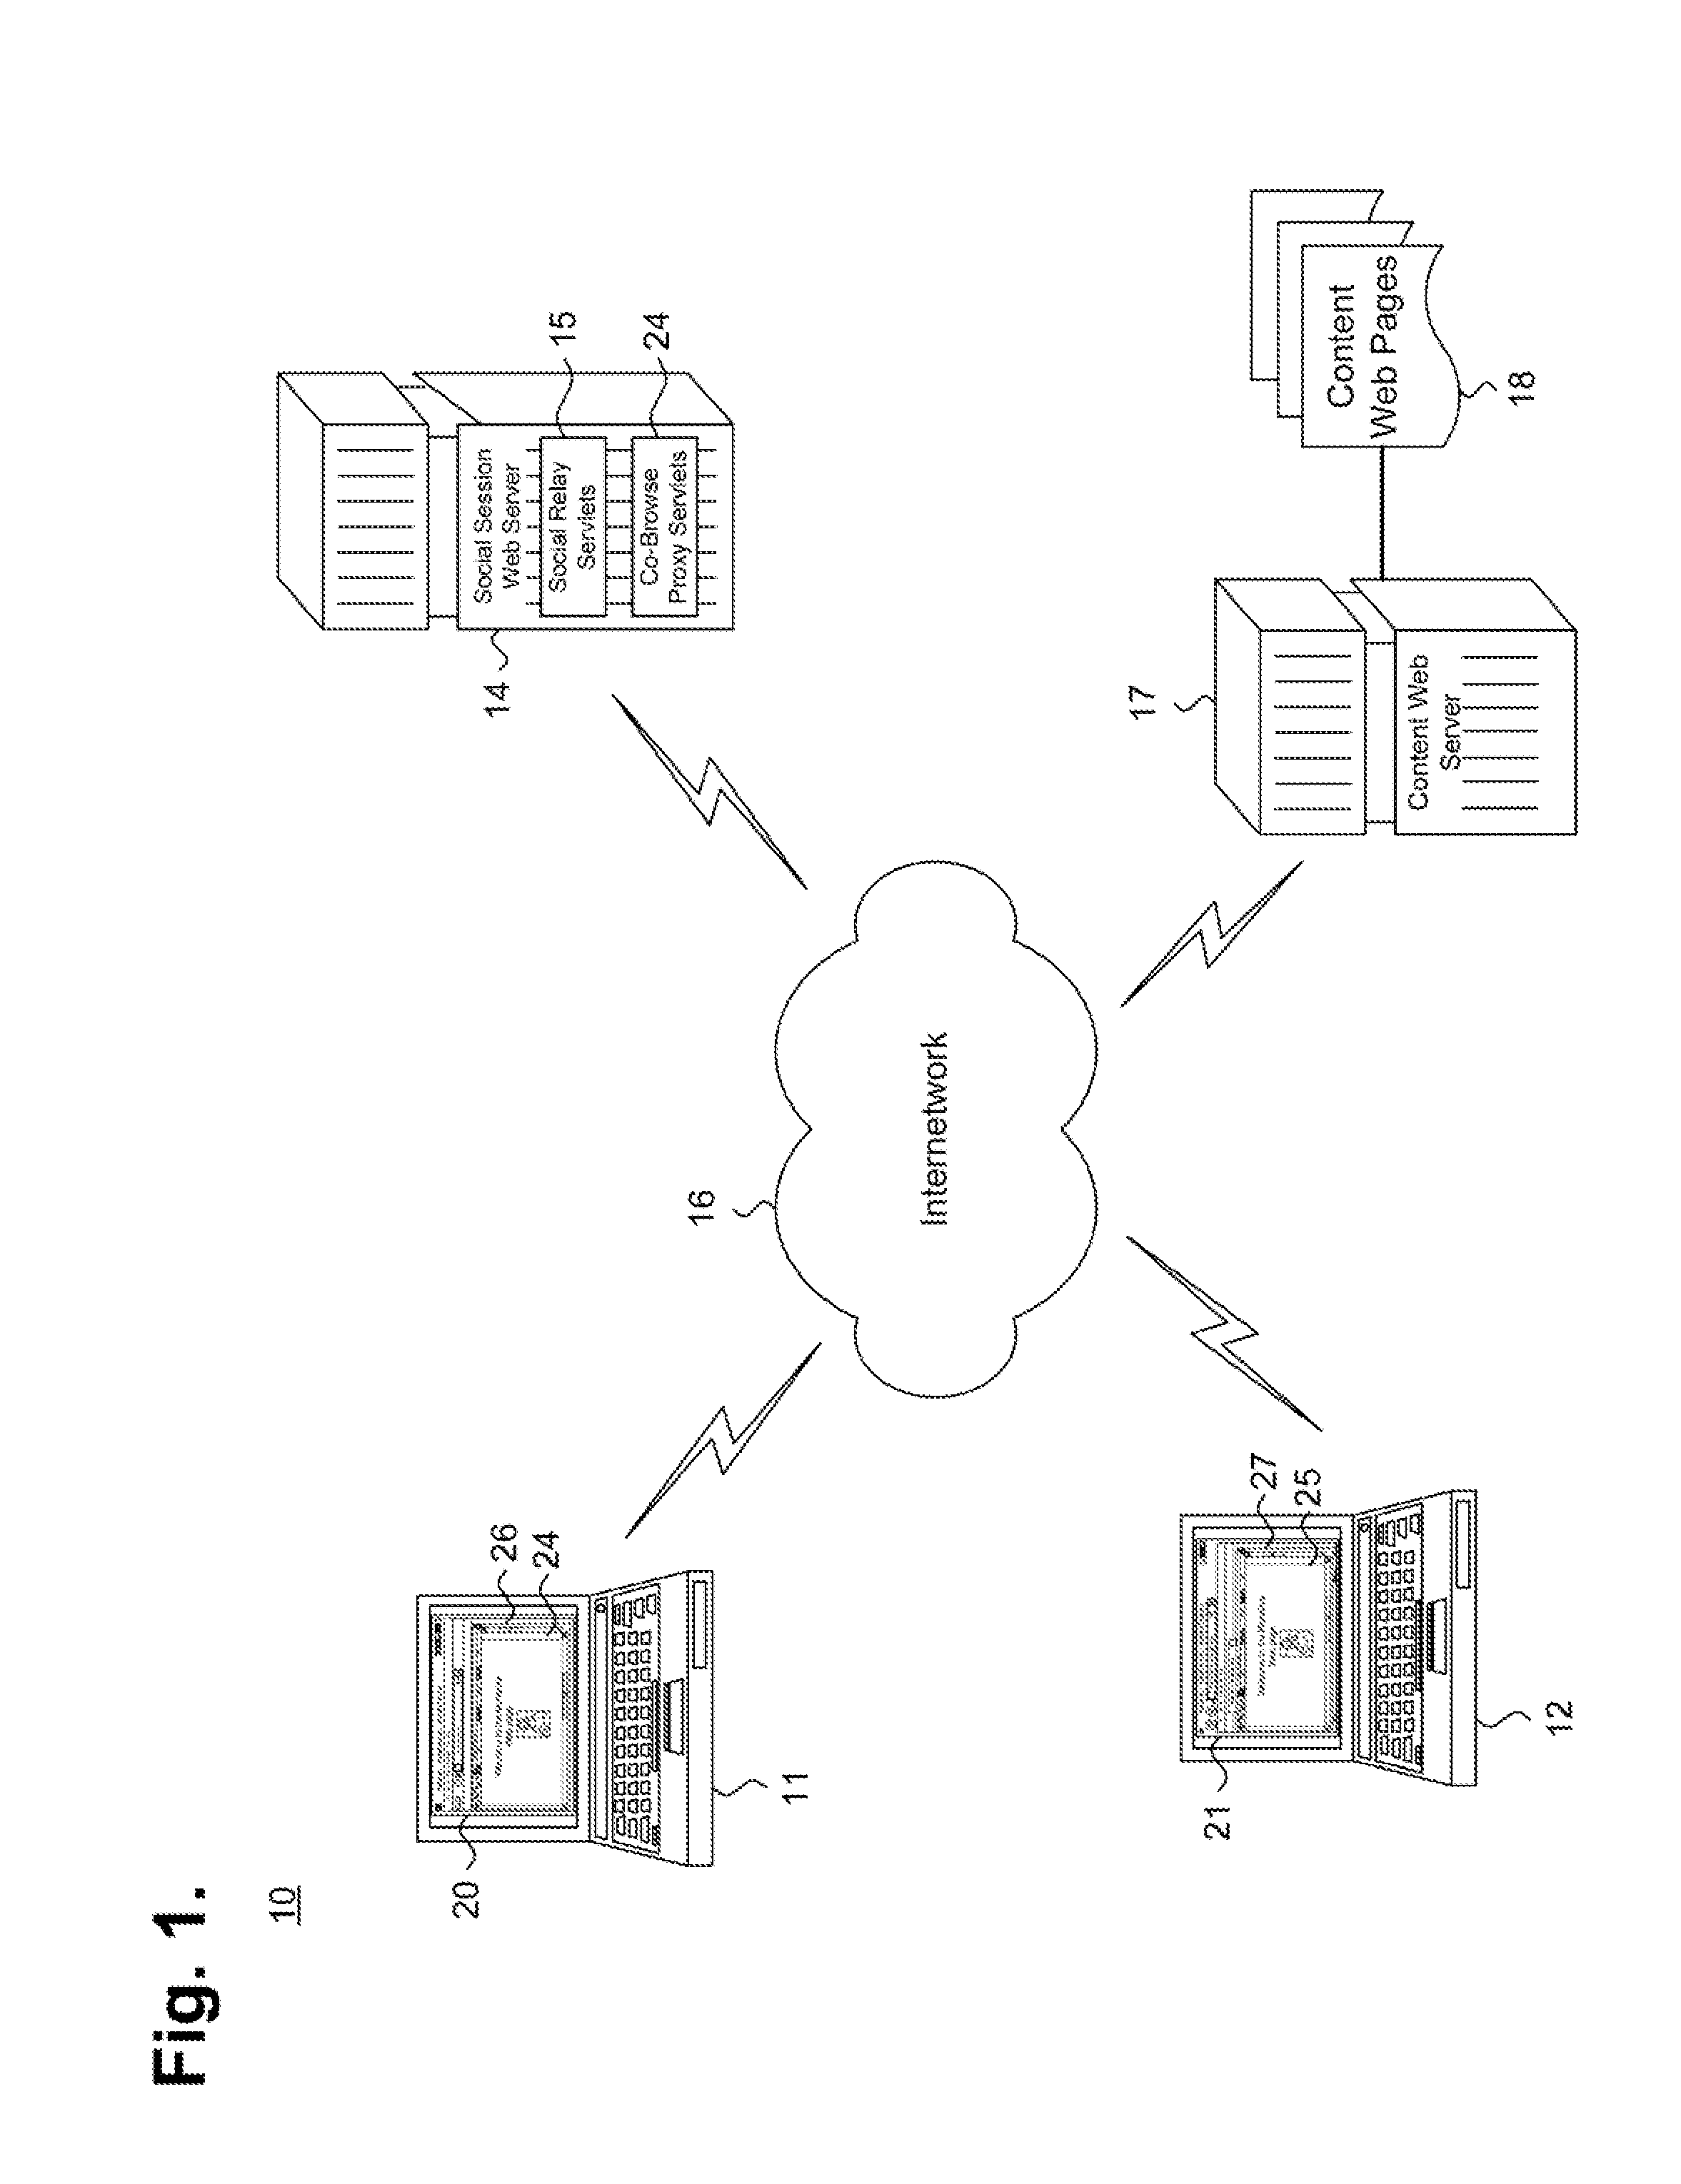 System and method for facilitating visual social communication through co-browsing